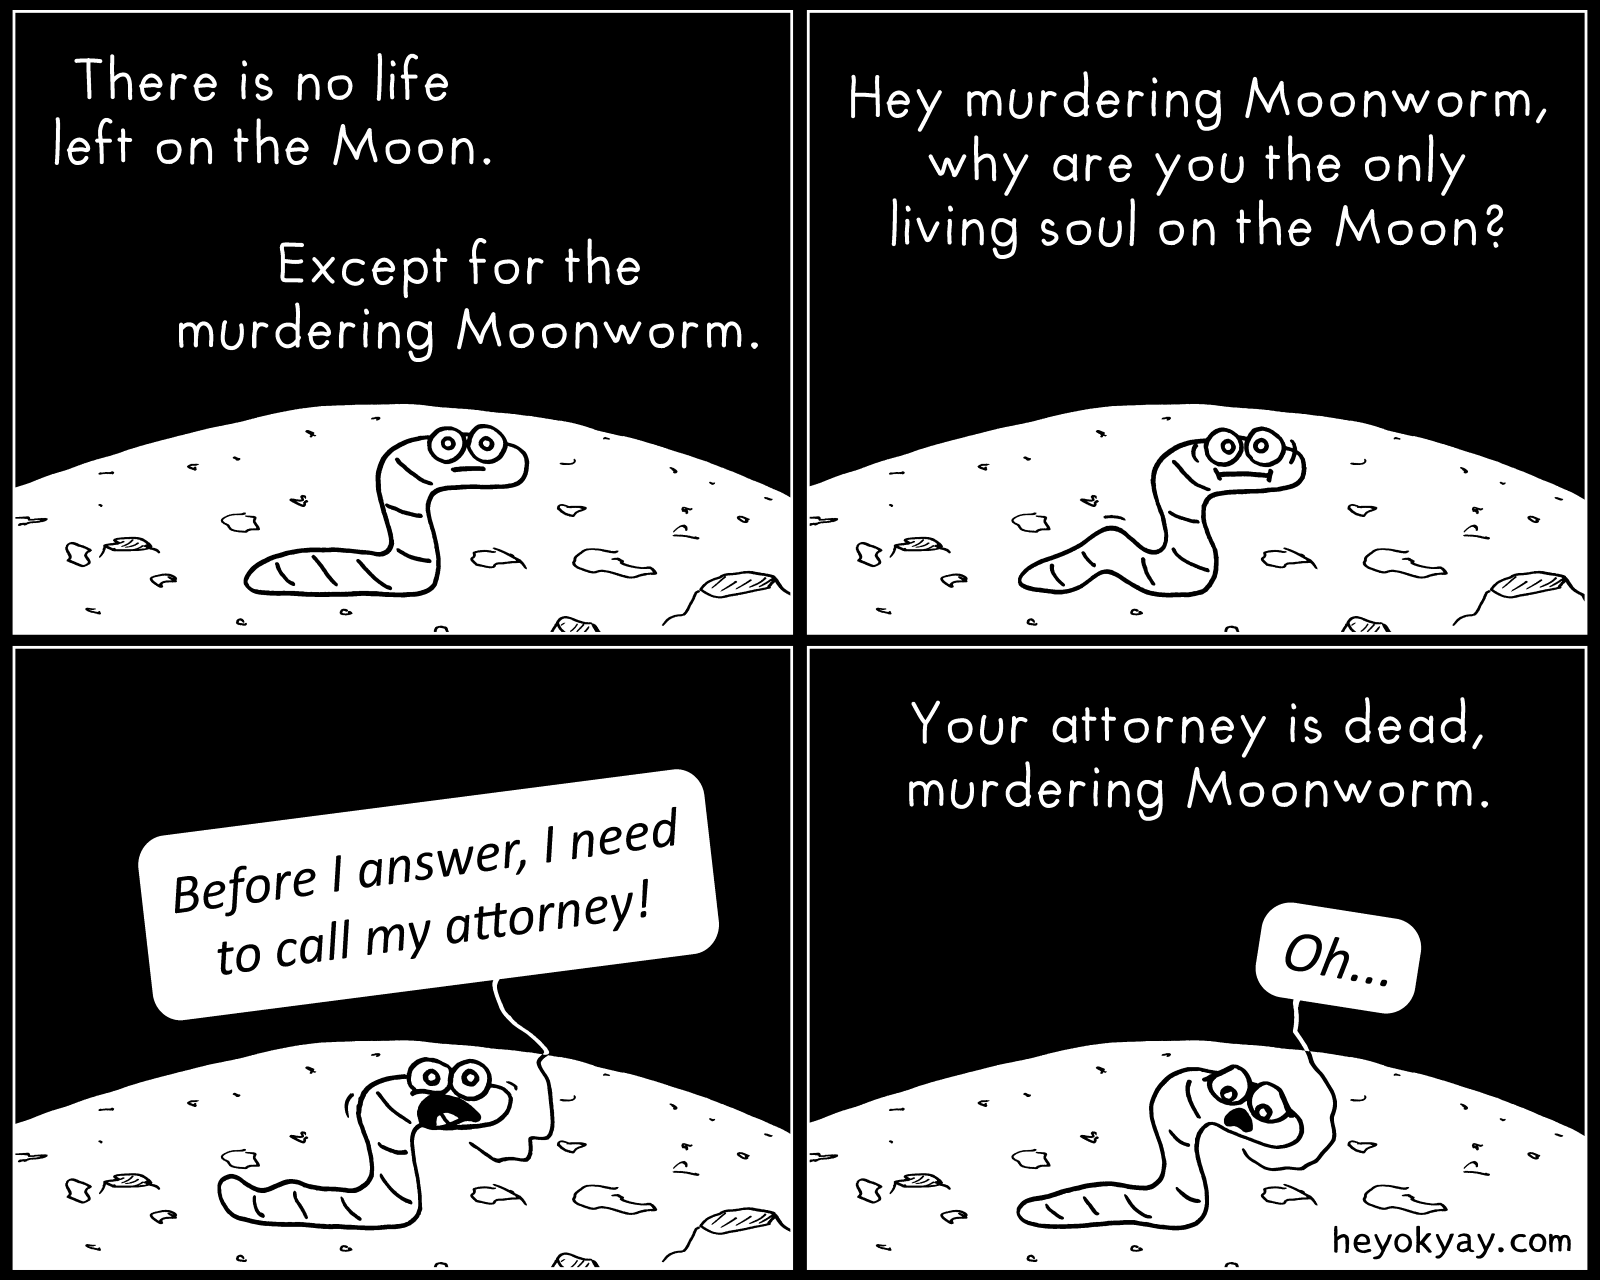 On the Moon | Hey ok yay? | There is no life left on the Moon. Except for the murdering Moonworm. Hey murdering Moonworm, why are you the only living soul on the Moon? Before I answer, I need to call my attorney. Your attorney is dead, murdering Moonworm. Oh.